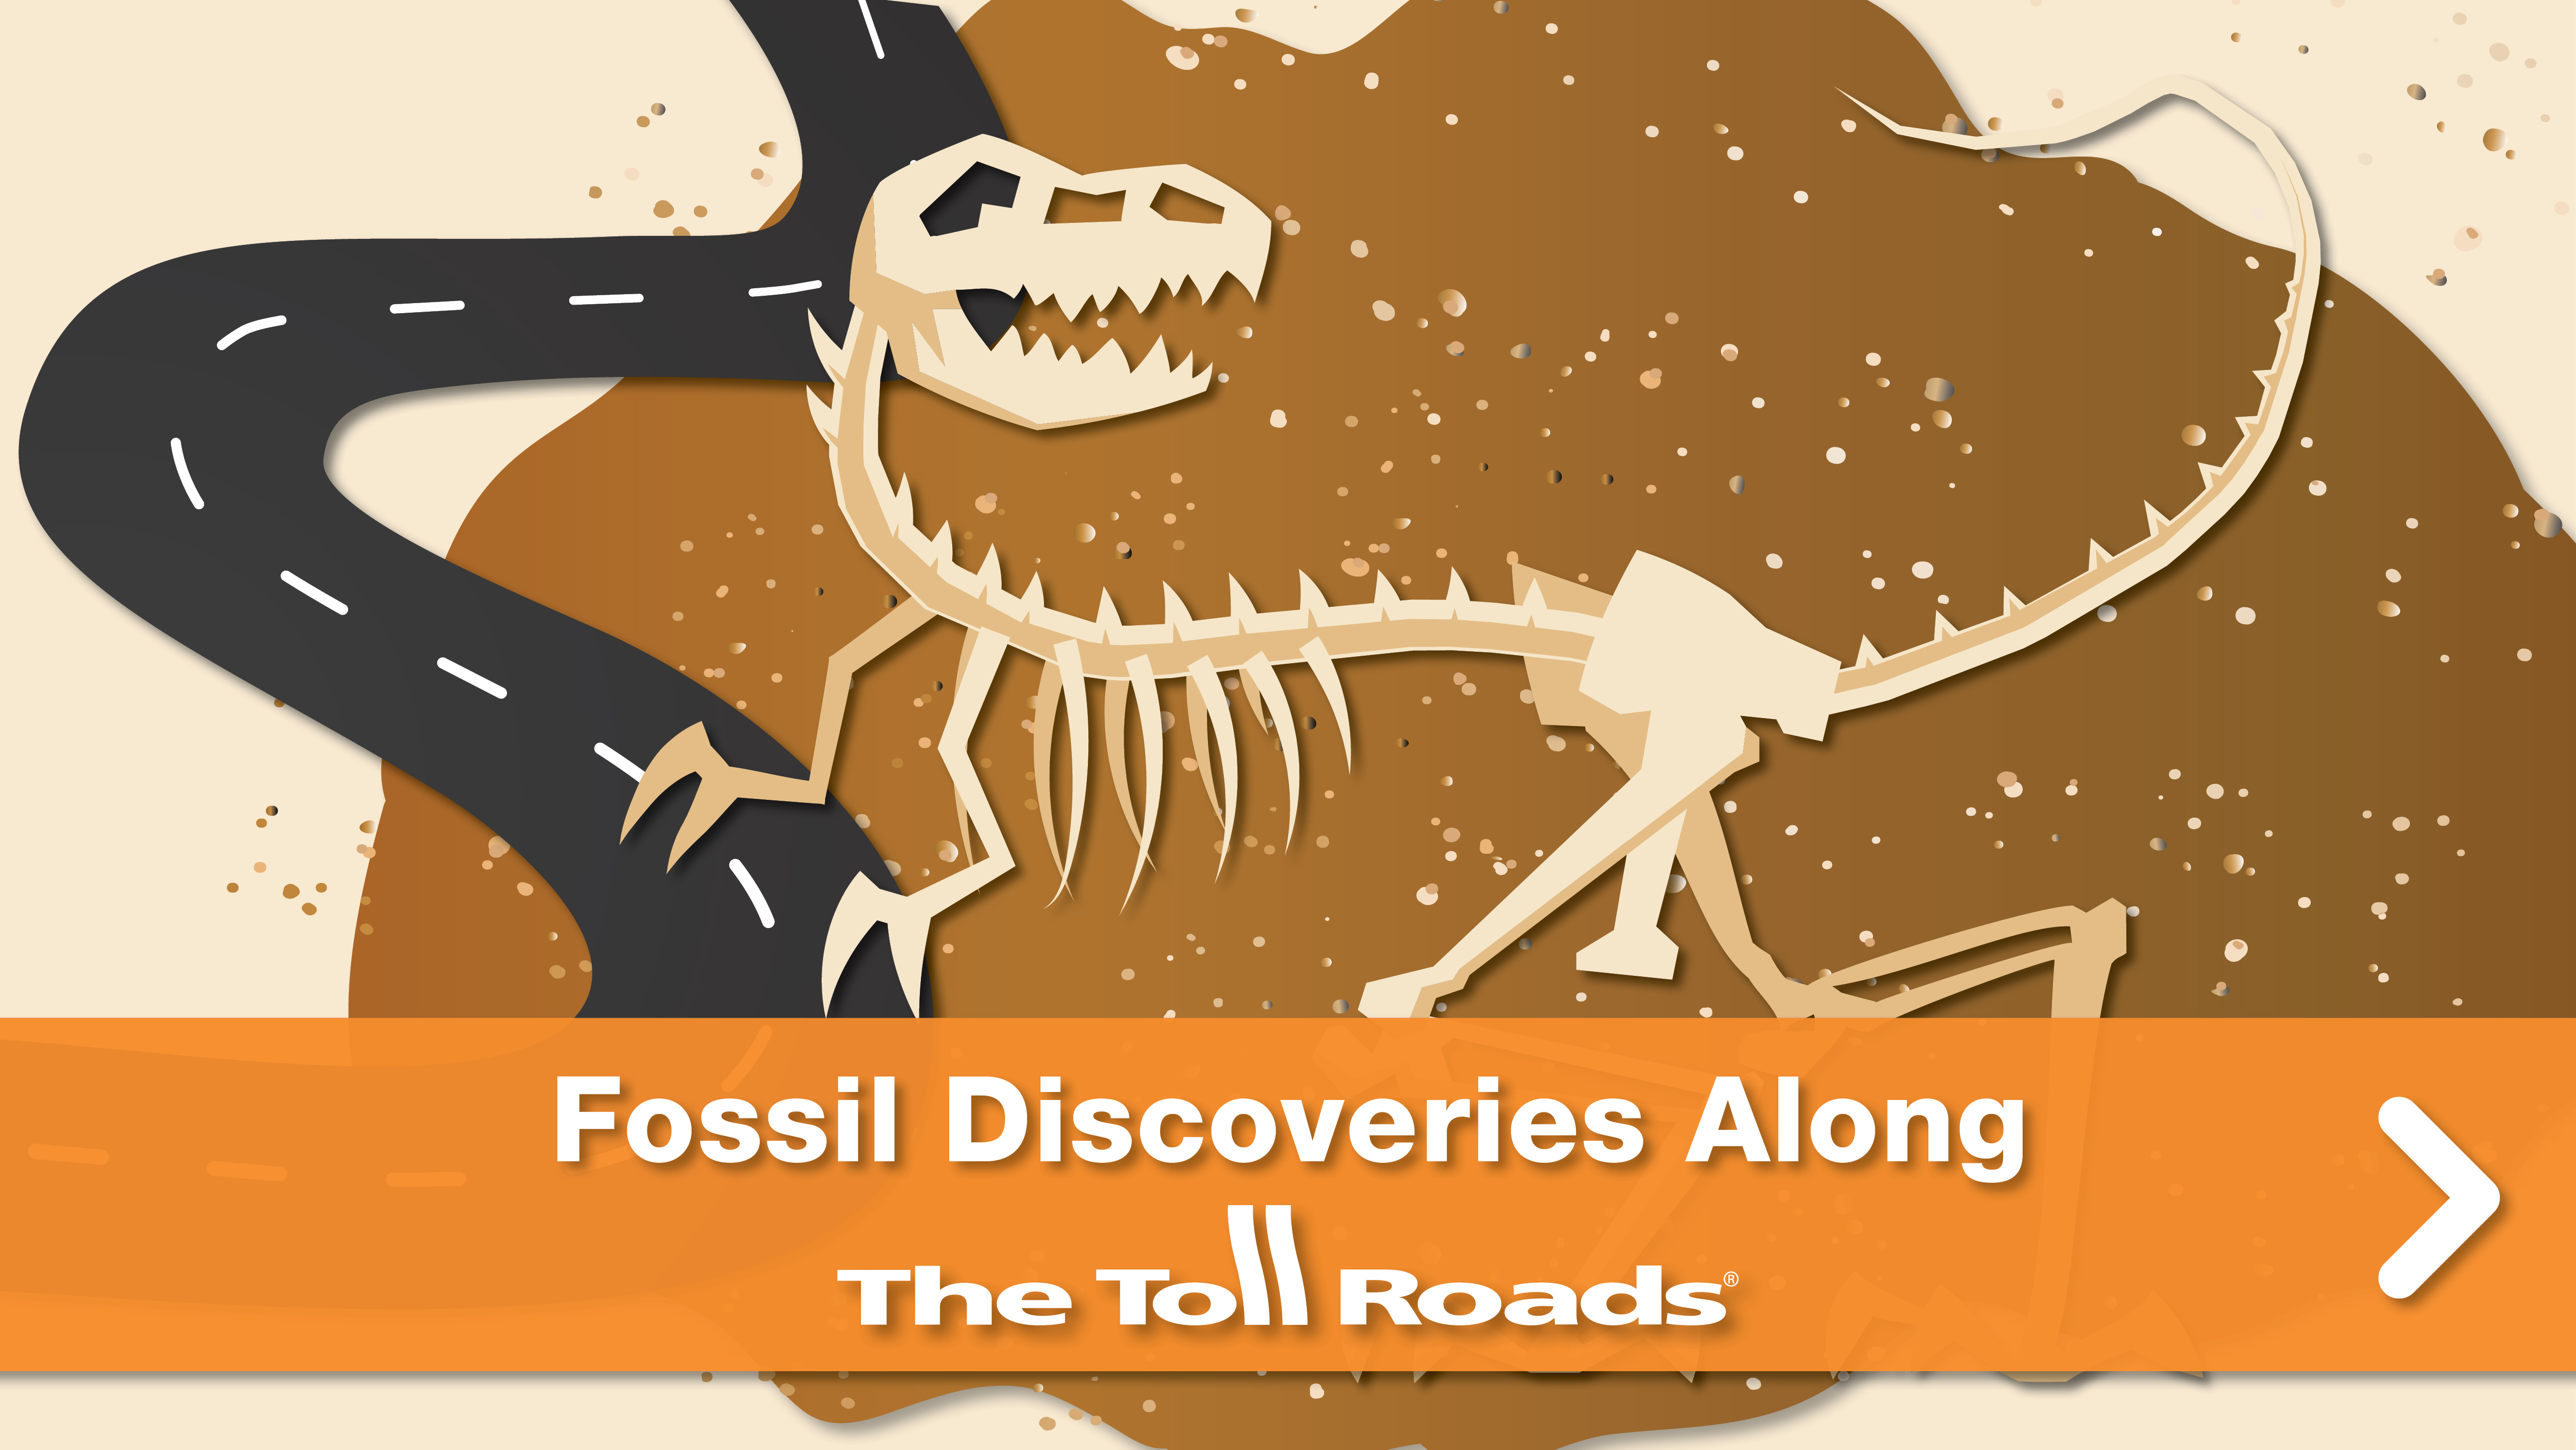 Fossil Discoveries Along The Toll Roads